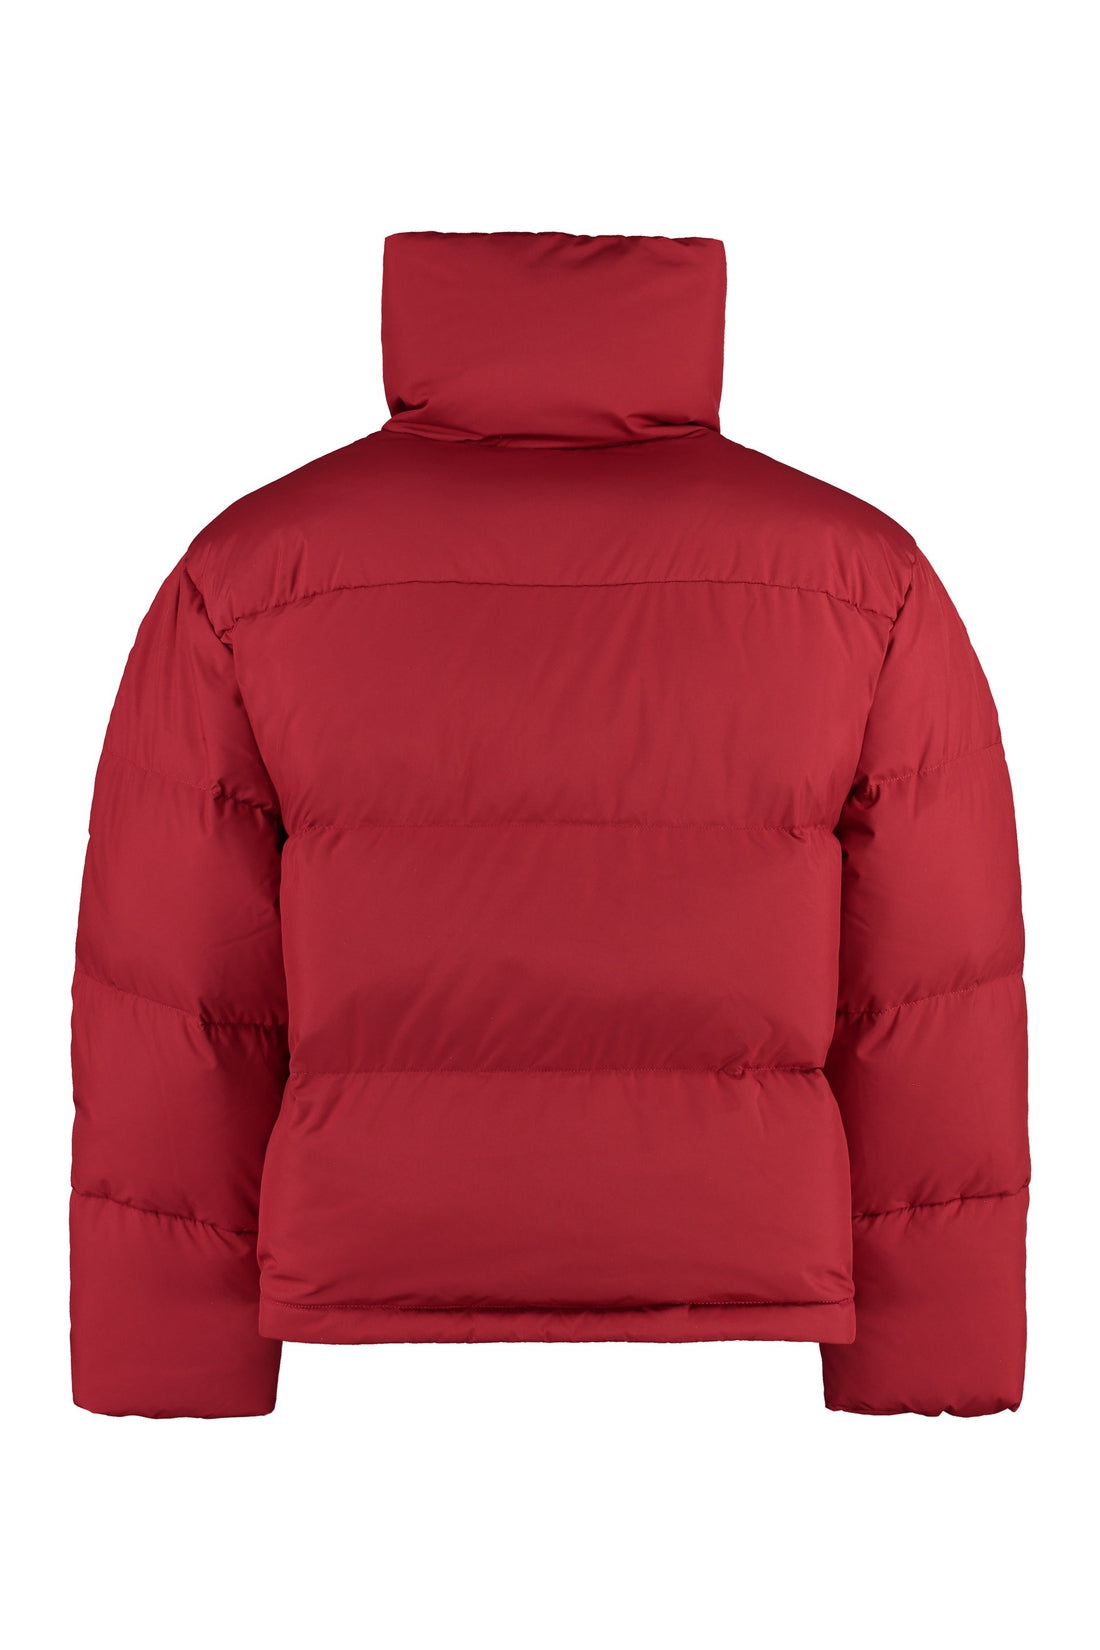 Acne Studios-OUTLET-SALE-Zip and snap button fastening down jacket-ARCHIVIST